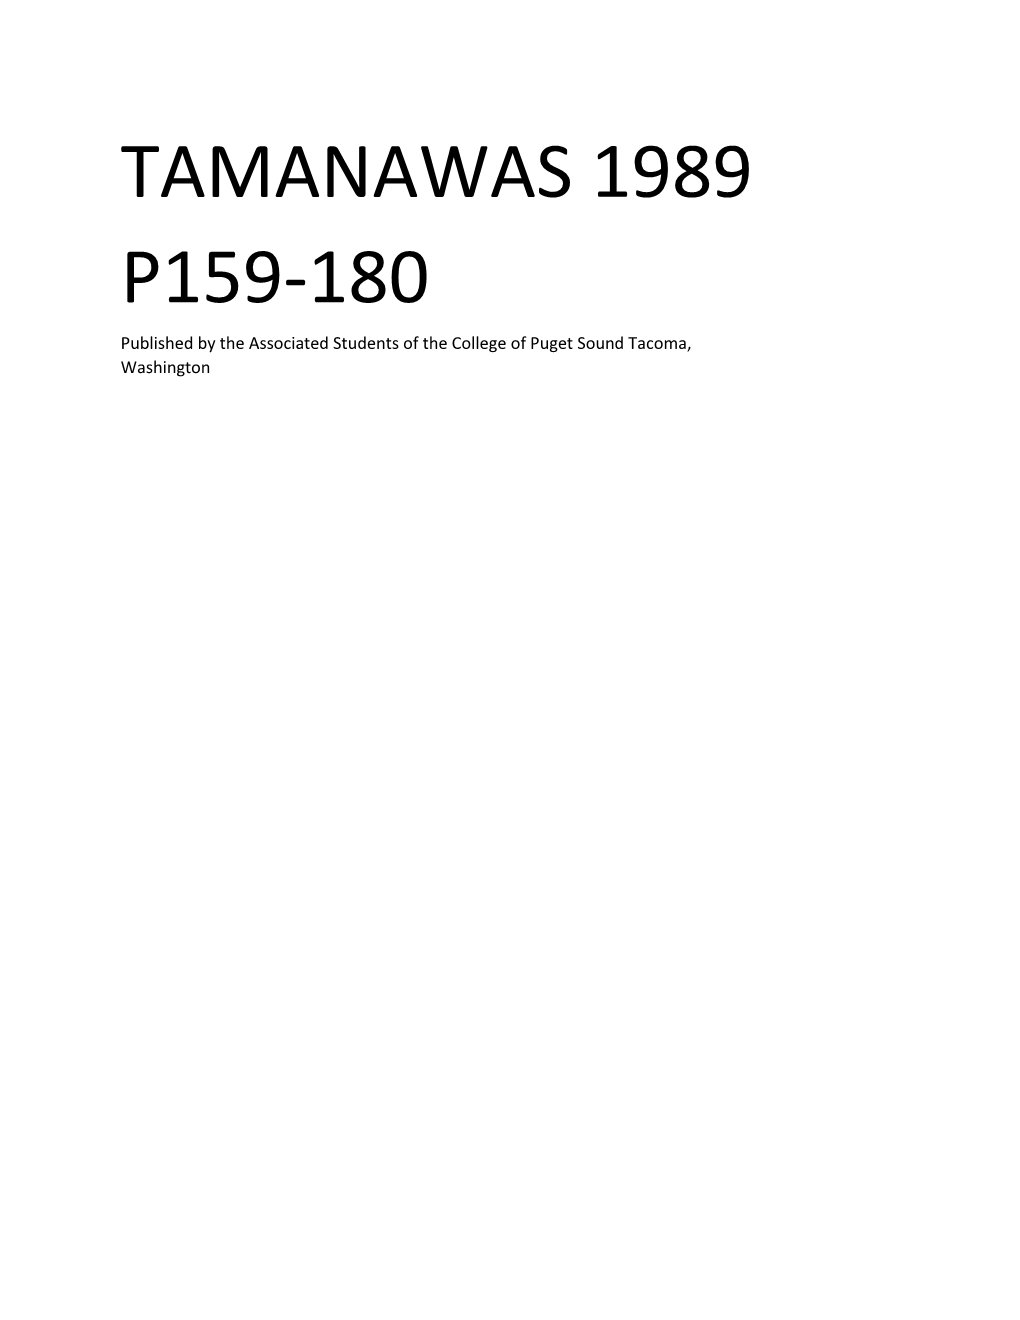 TAMANAWAS 1989 P159-180 Published by the Associated Students of the College of Puget Sound Tacoma, Washington